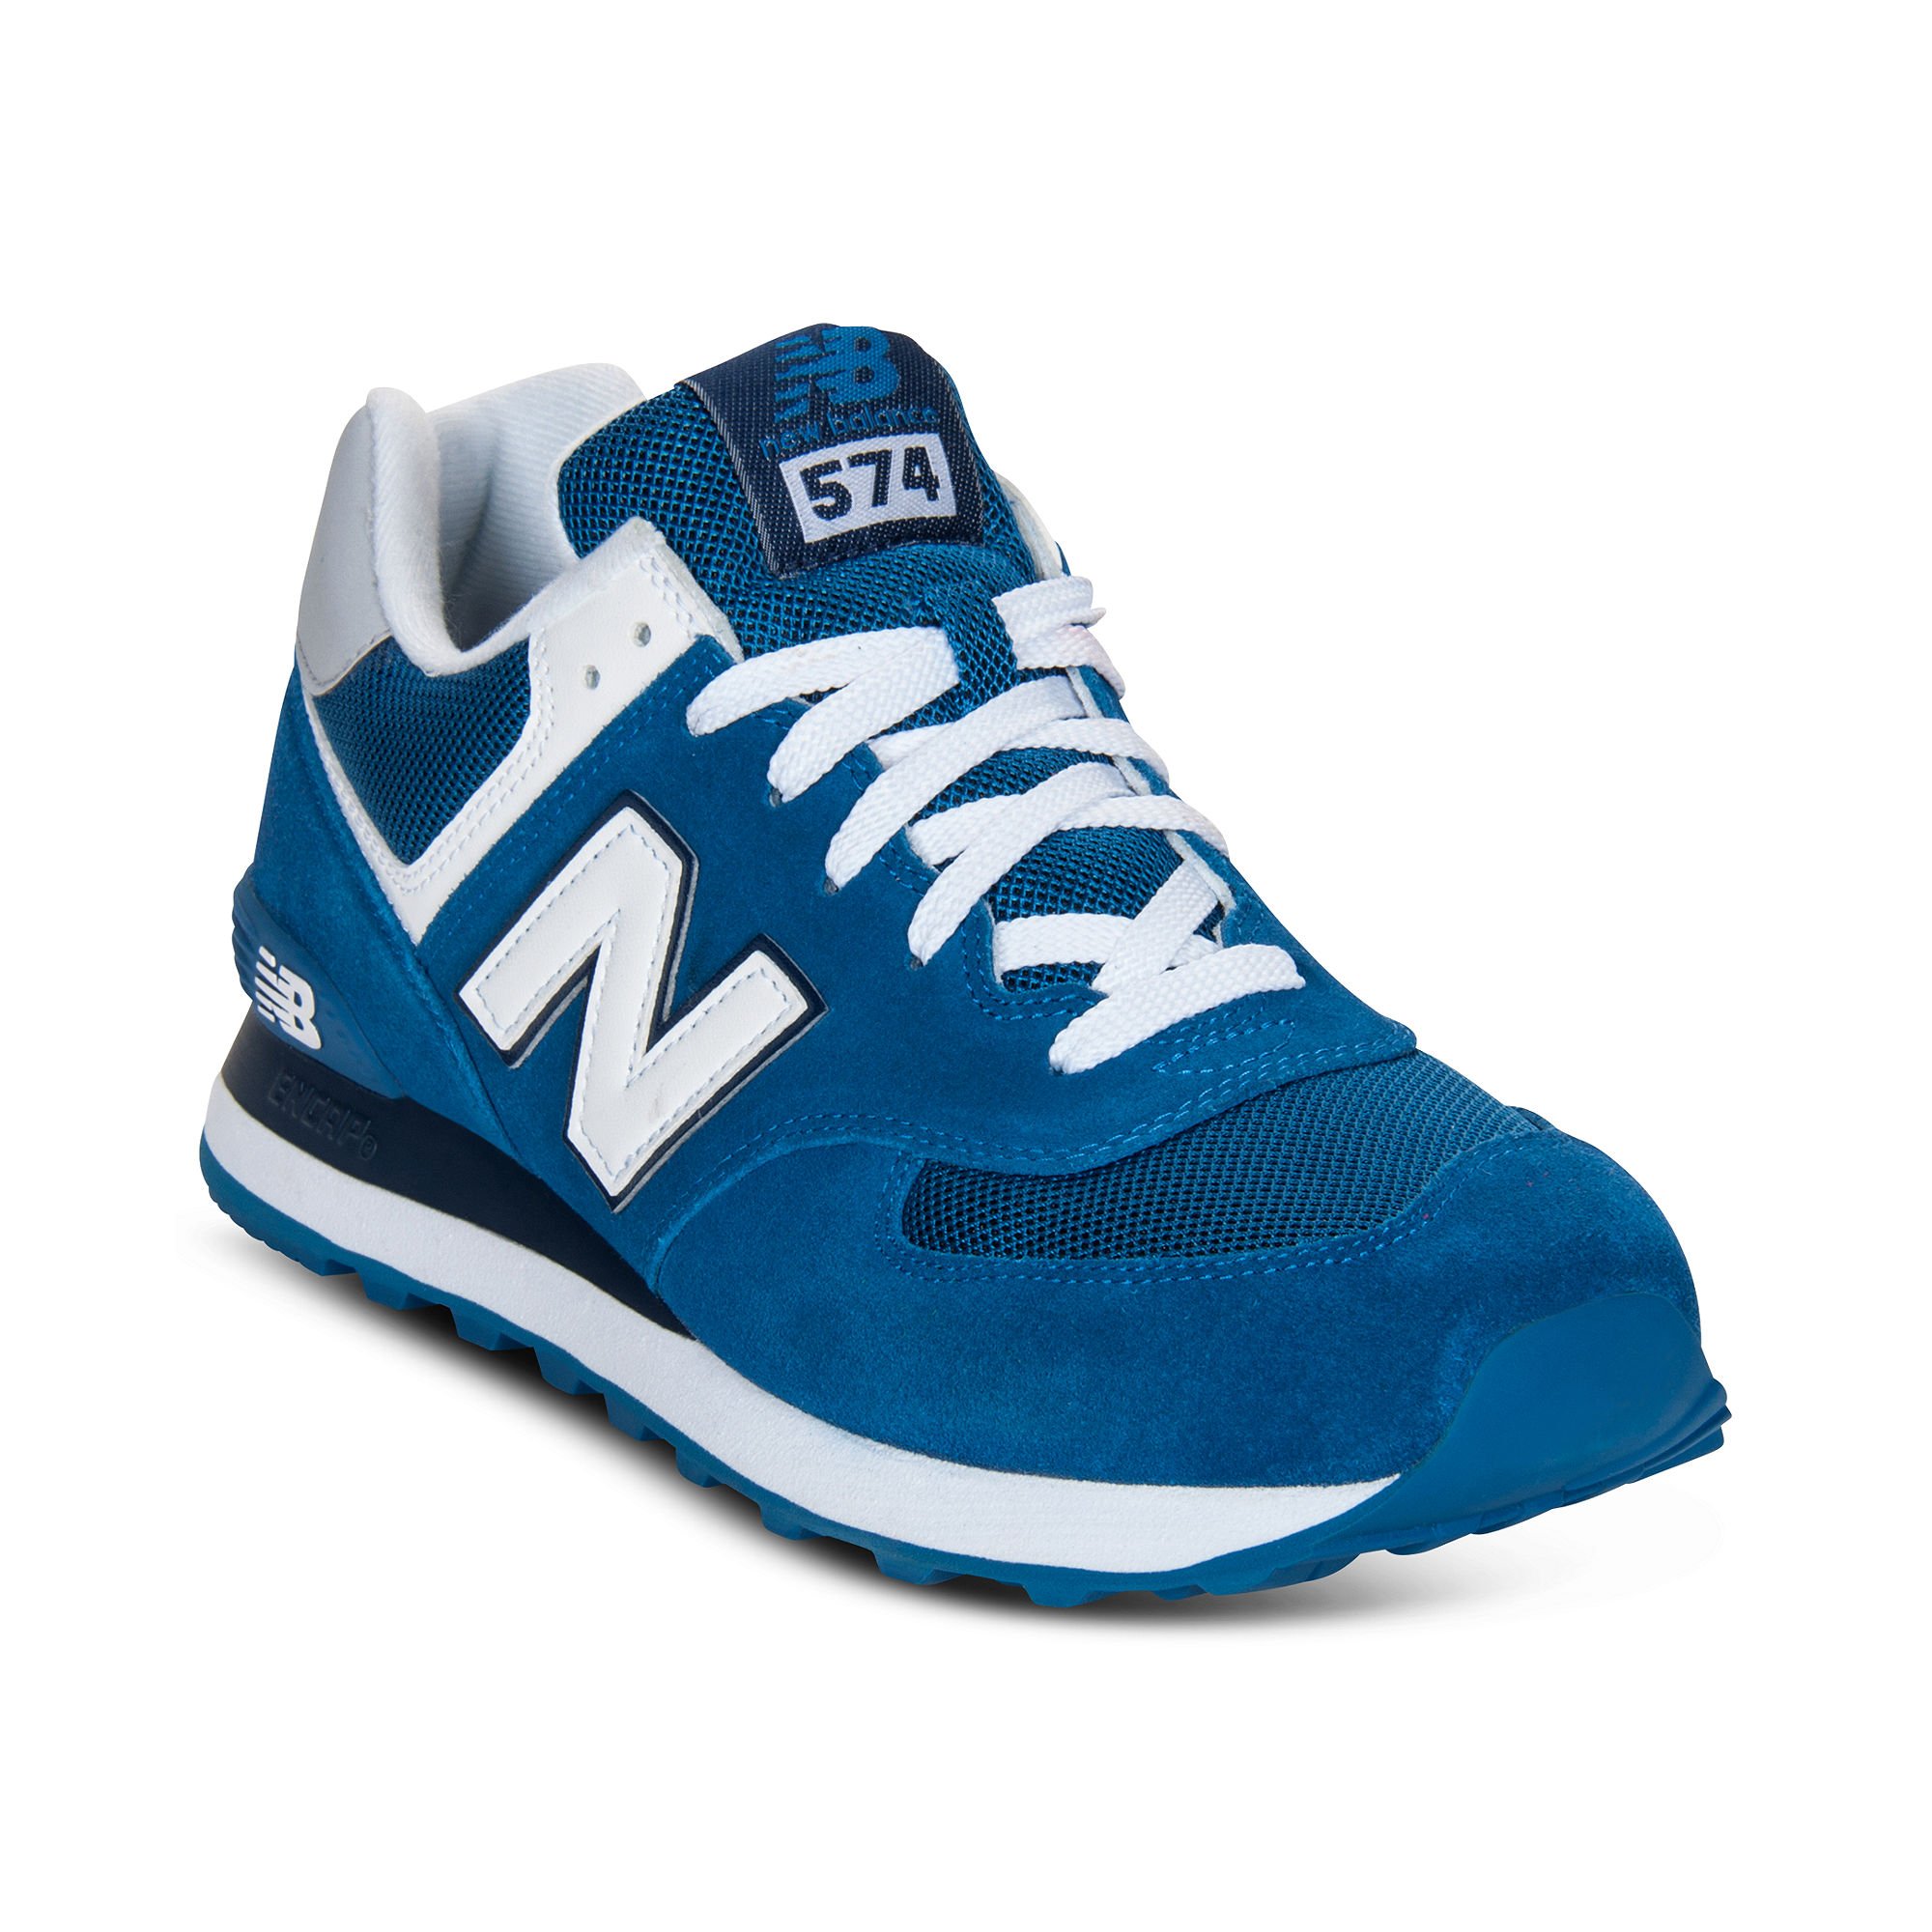 Lyst - New Balance 574 Sneakers in Blue for Men